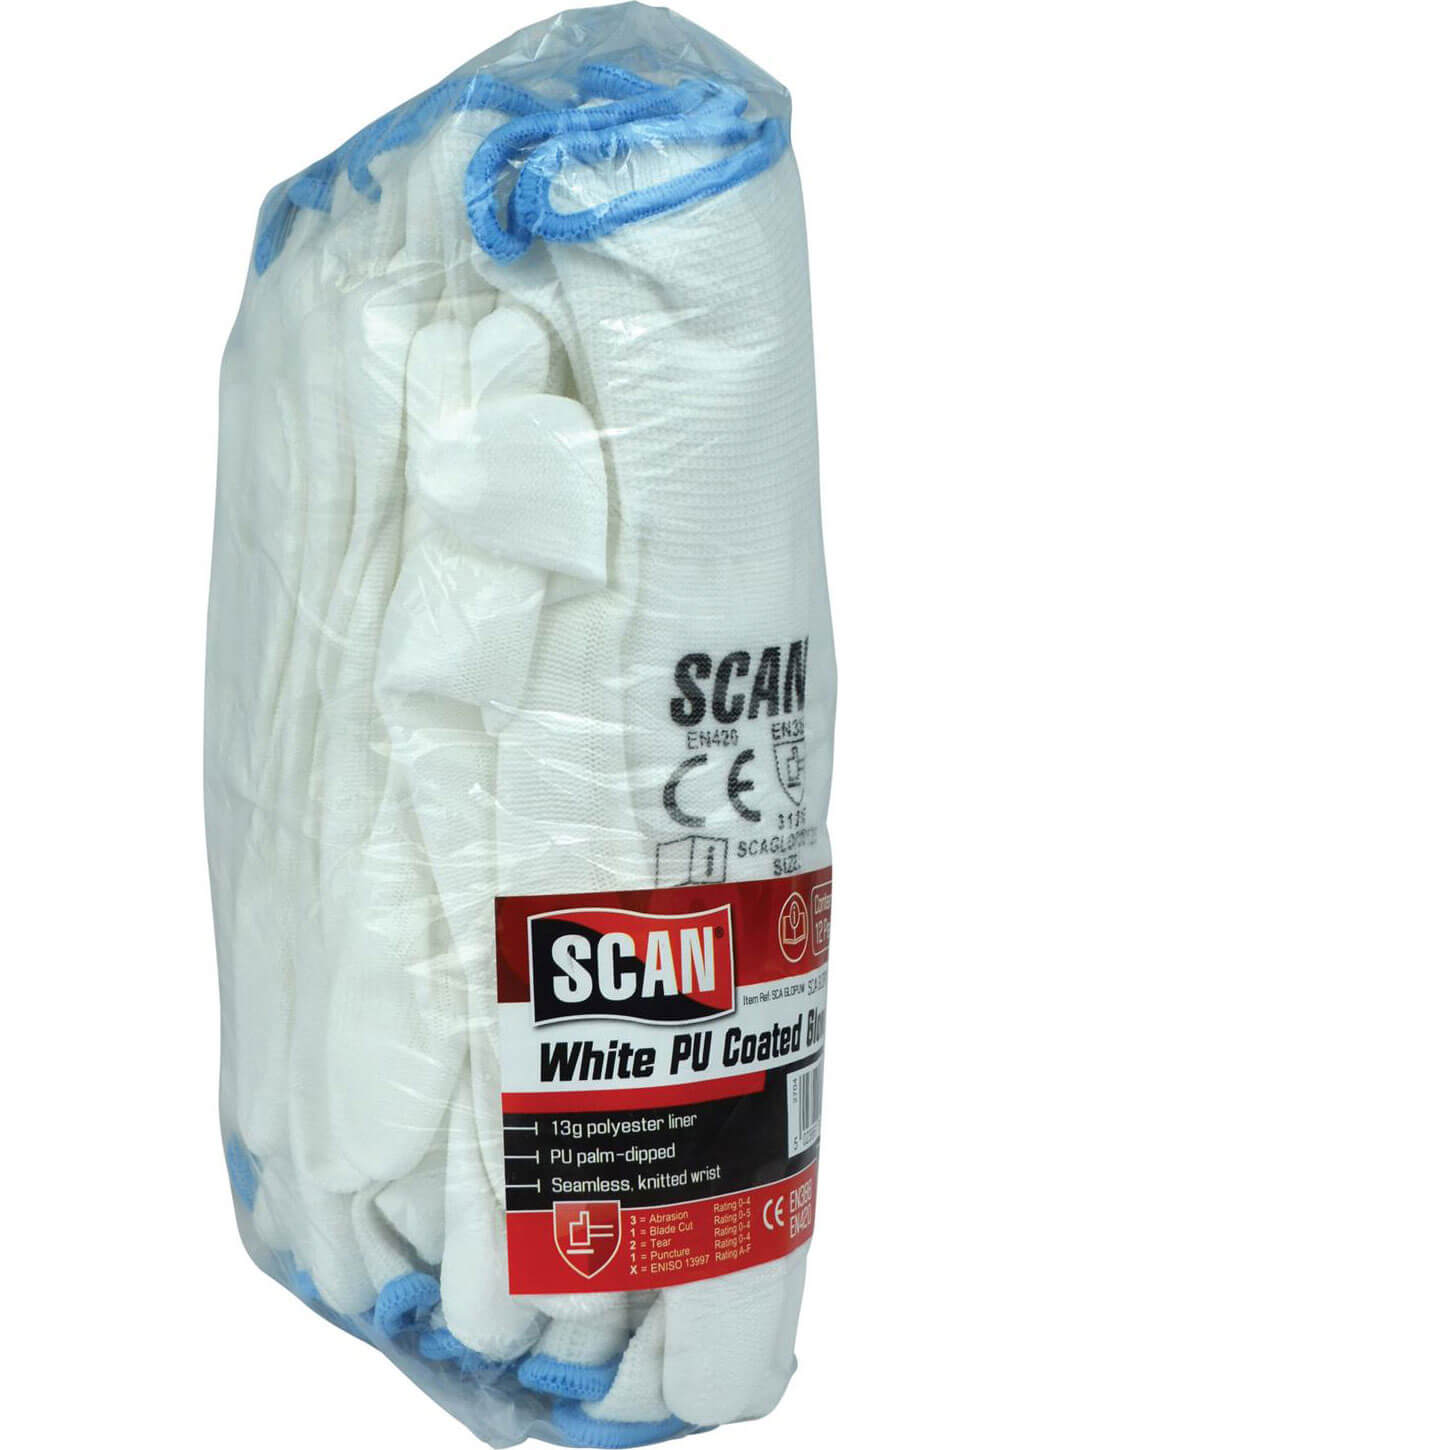 Image of Scan PU Coated Work Gloves White L Pack of 12